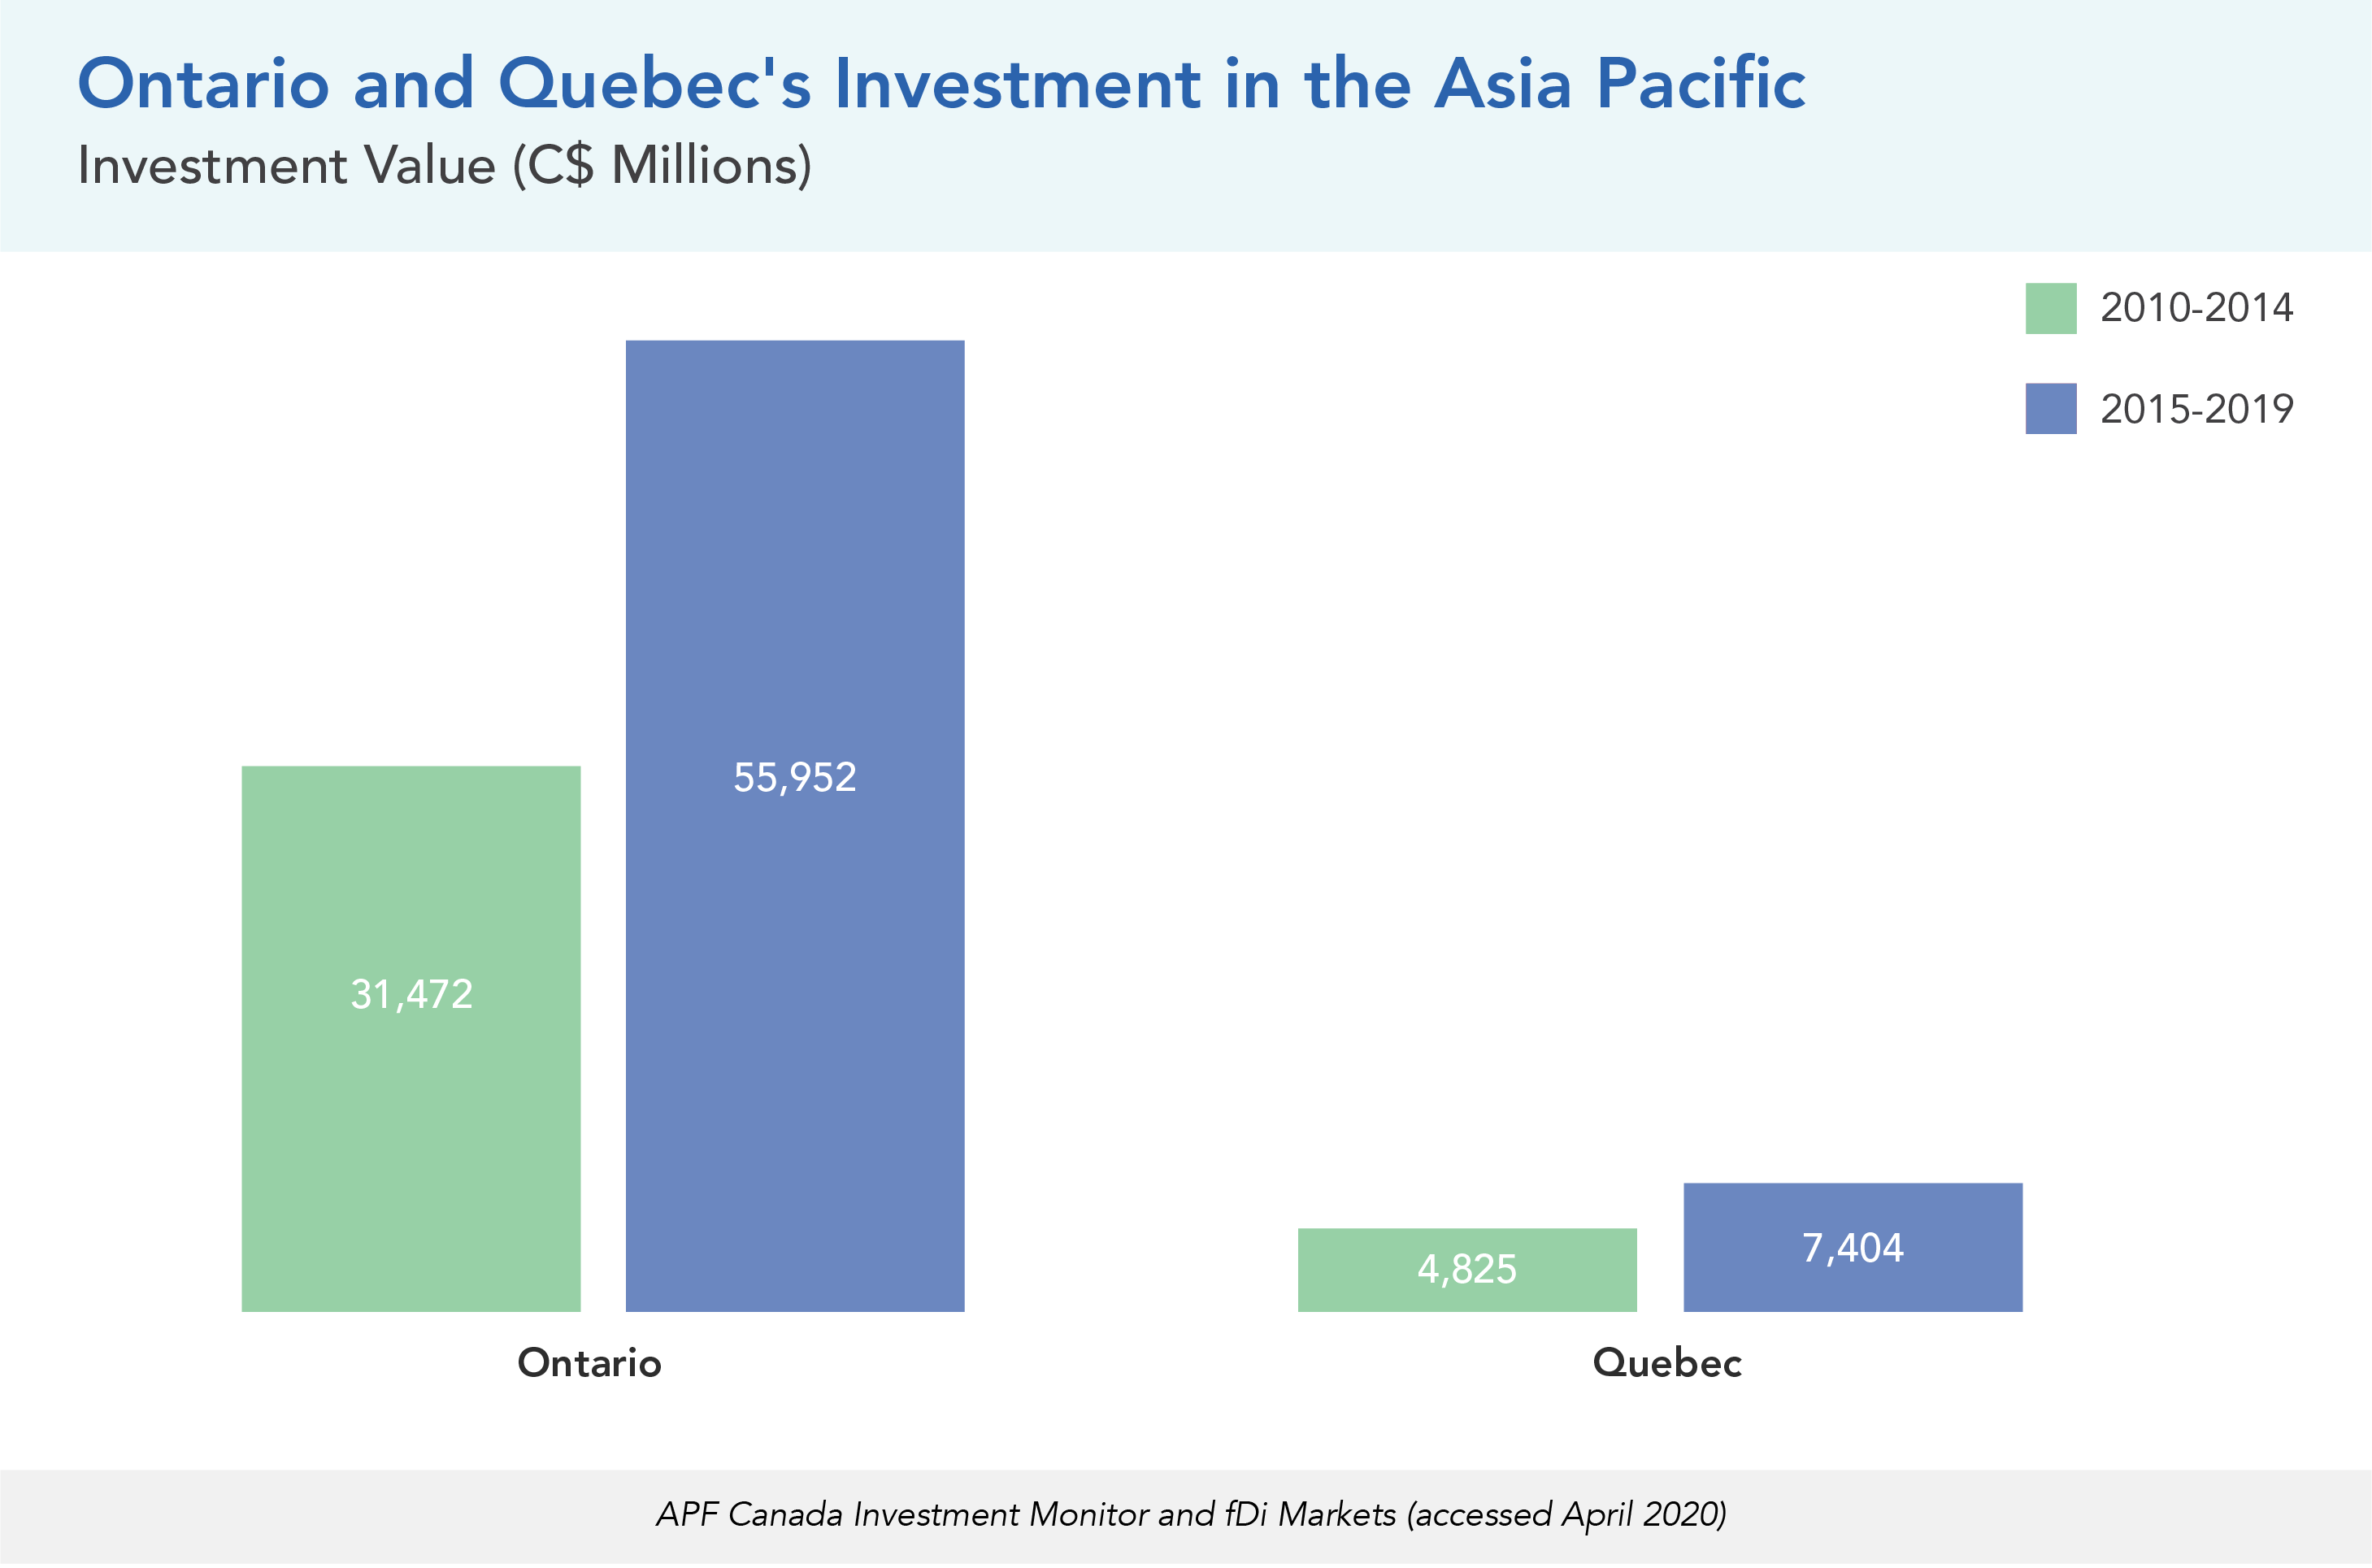 Ontario and Quebec's Investment in the Asia Pacific